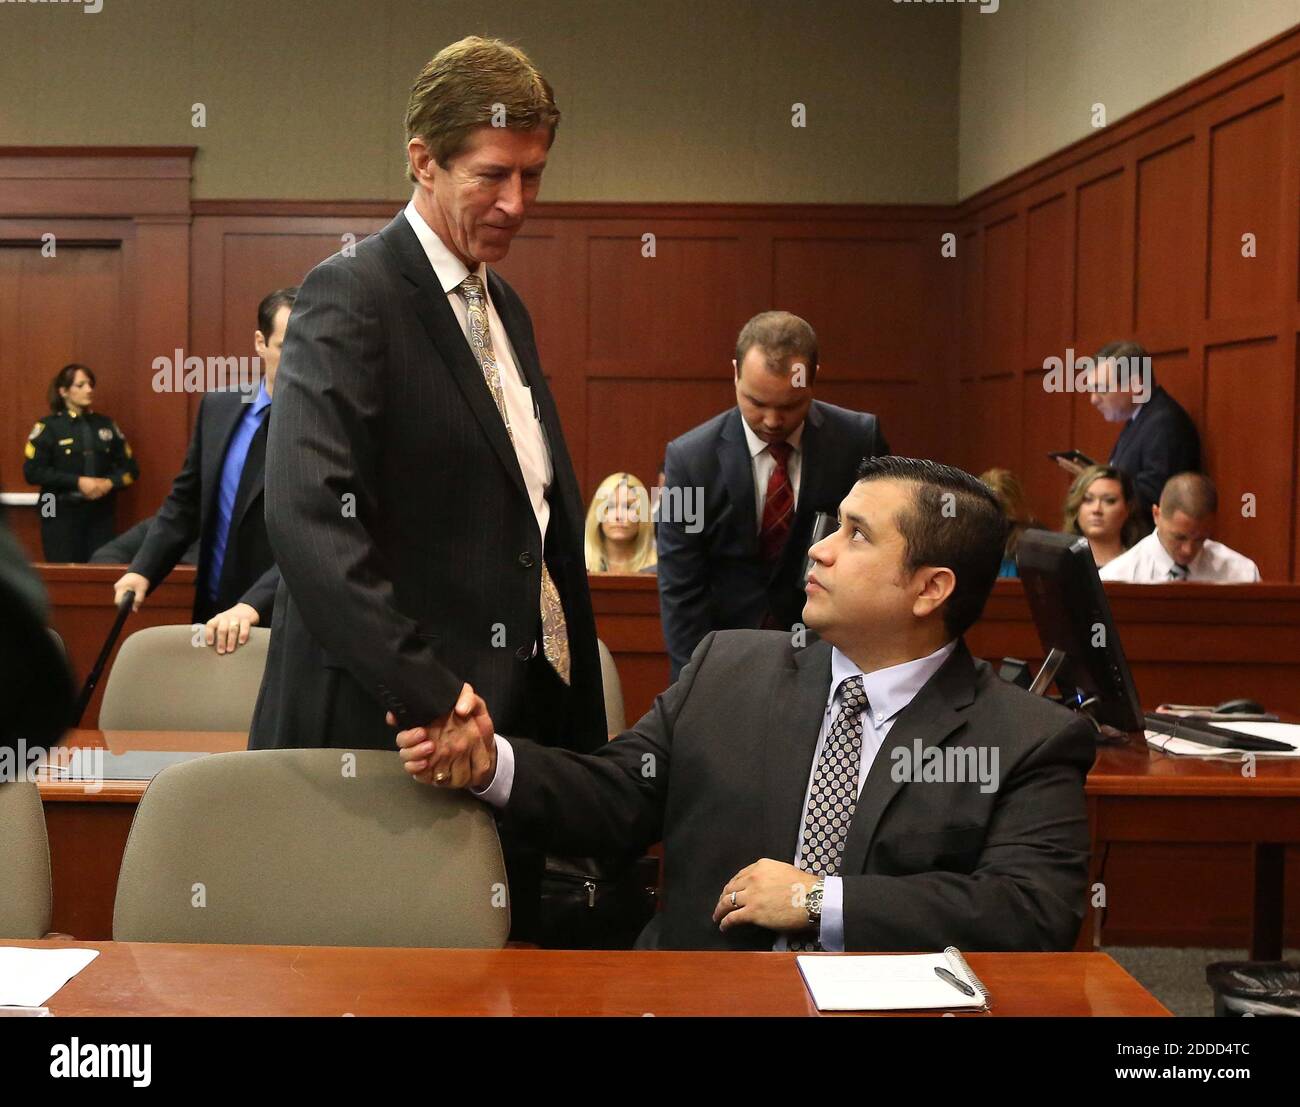 NO FILM, NO VIDEO, NO TV, NO DOCUMENTARY - George Zimmerman is greeted by defense attorney Mark O'Mara, left, in Seminole circuit court, on the 11th day of his trial, in Sanford, Florida, USA, Monday, June 24, 2013. Zimmerman is accused in the fatal shooting of Trayvon Martin. Photo by Joe Burbank/Orlando Sentinel/MCT/ABACAPRESS.COM Stock Photo